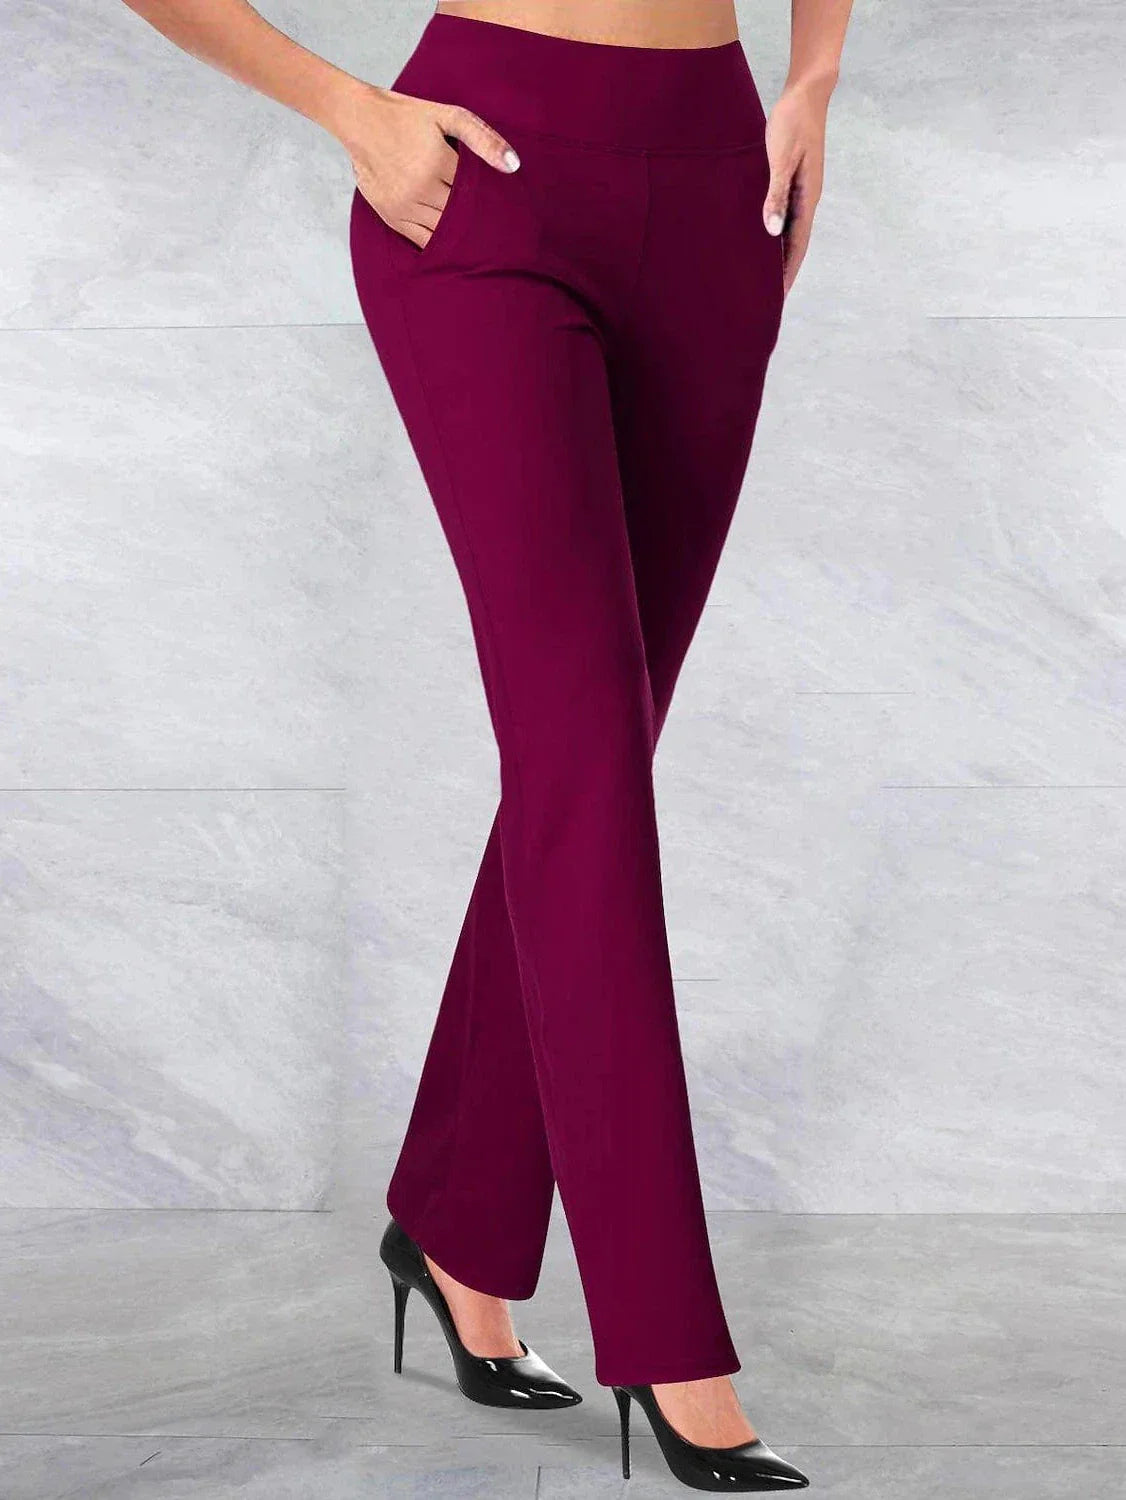 Everyday Women's Straight Leg Stretchy Pants in Black and Wine - S M